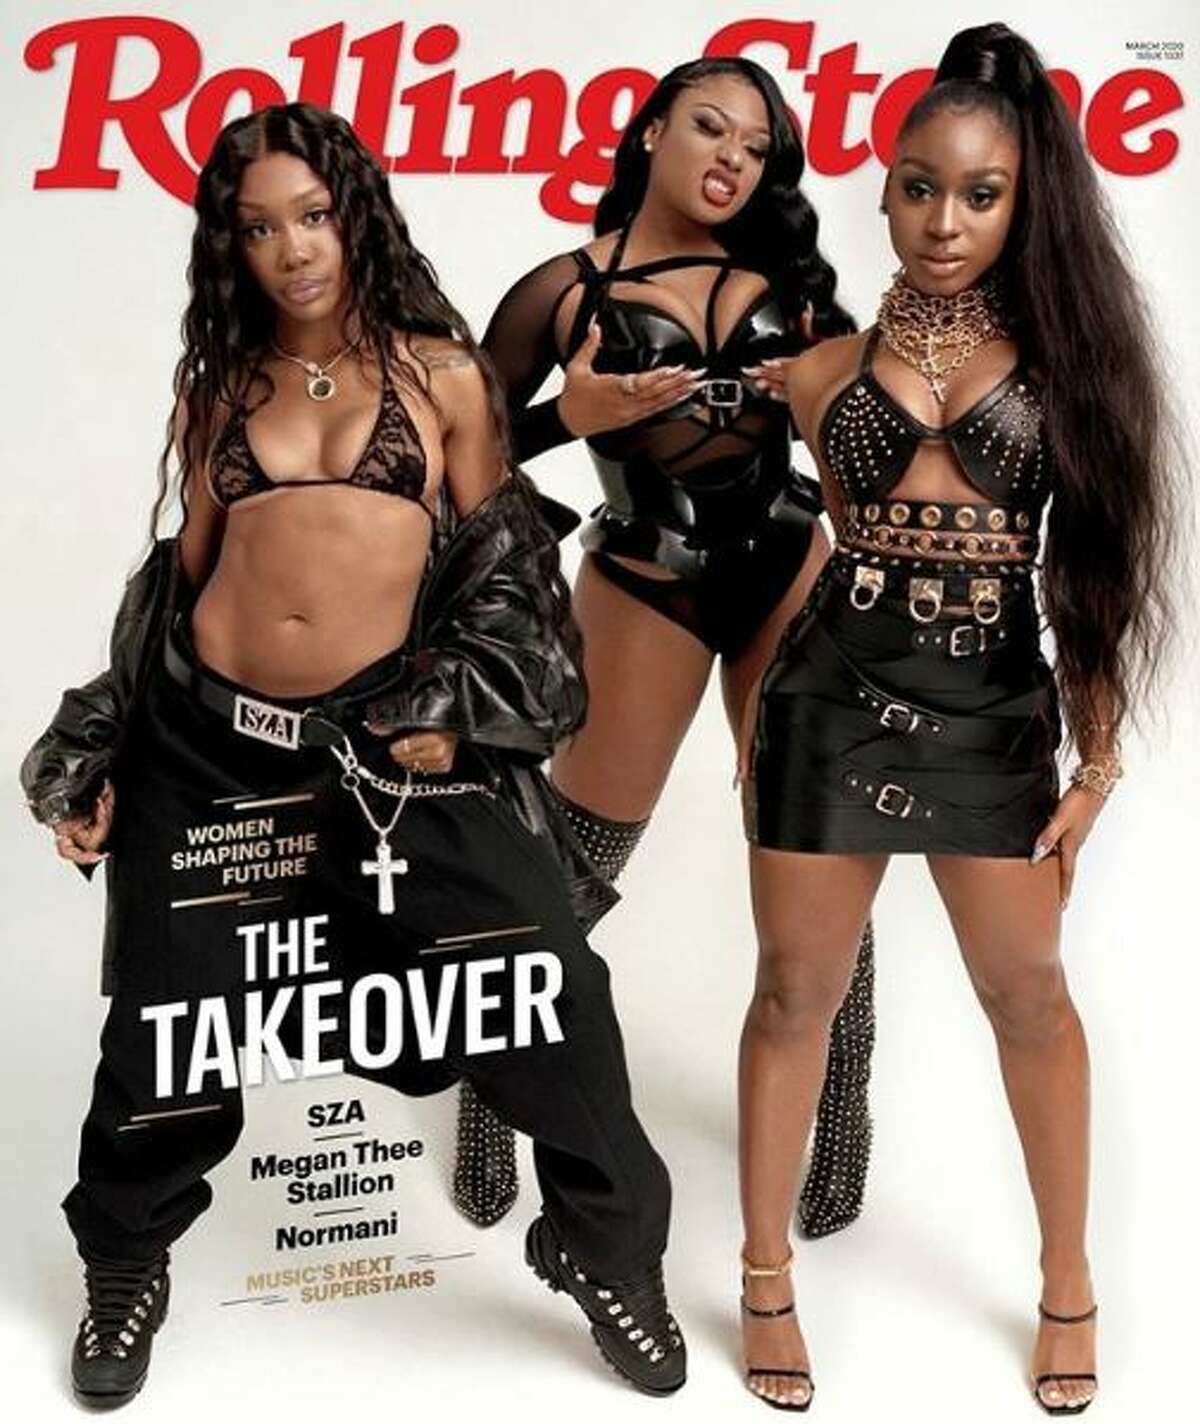 Houston’s own hot girl, Megan Thee Stallion stars on the cover of Rolling Stone’s second annual Women Shaping the Future issue, with SZA and Normani.